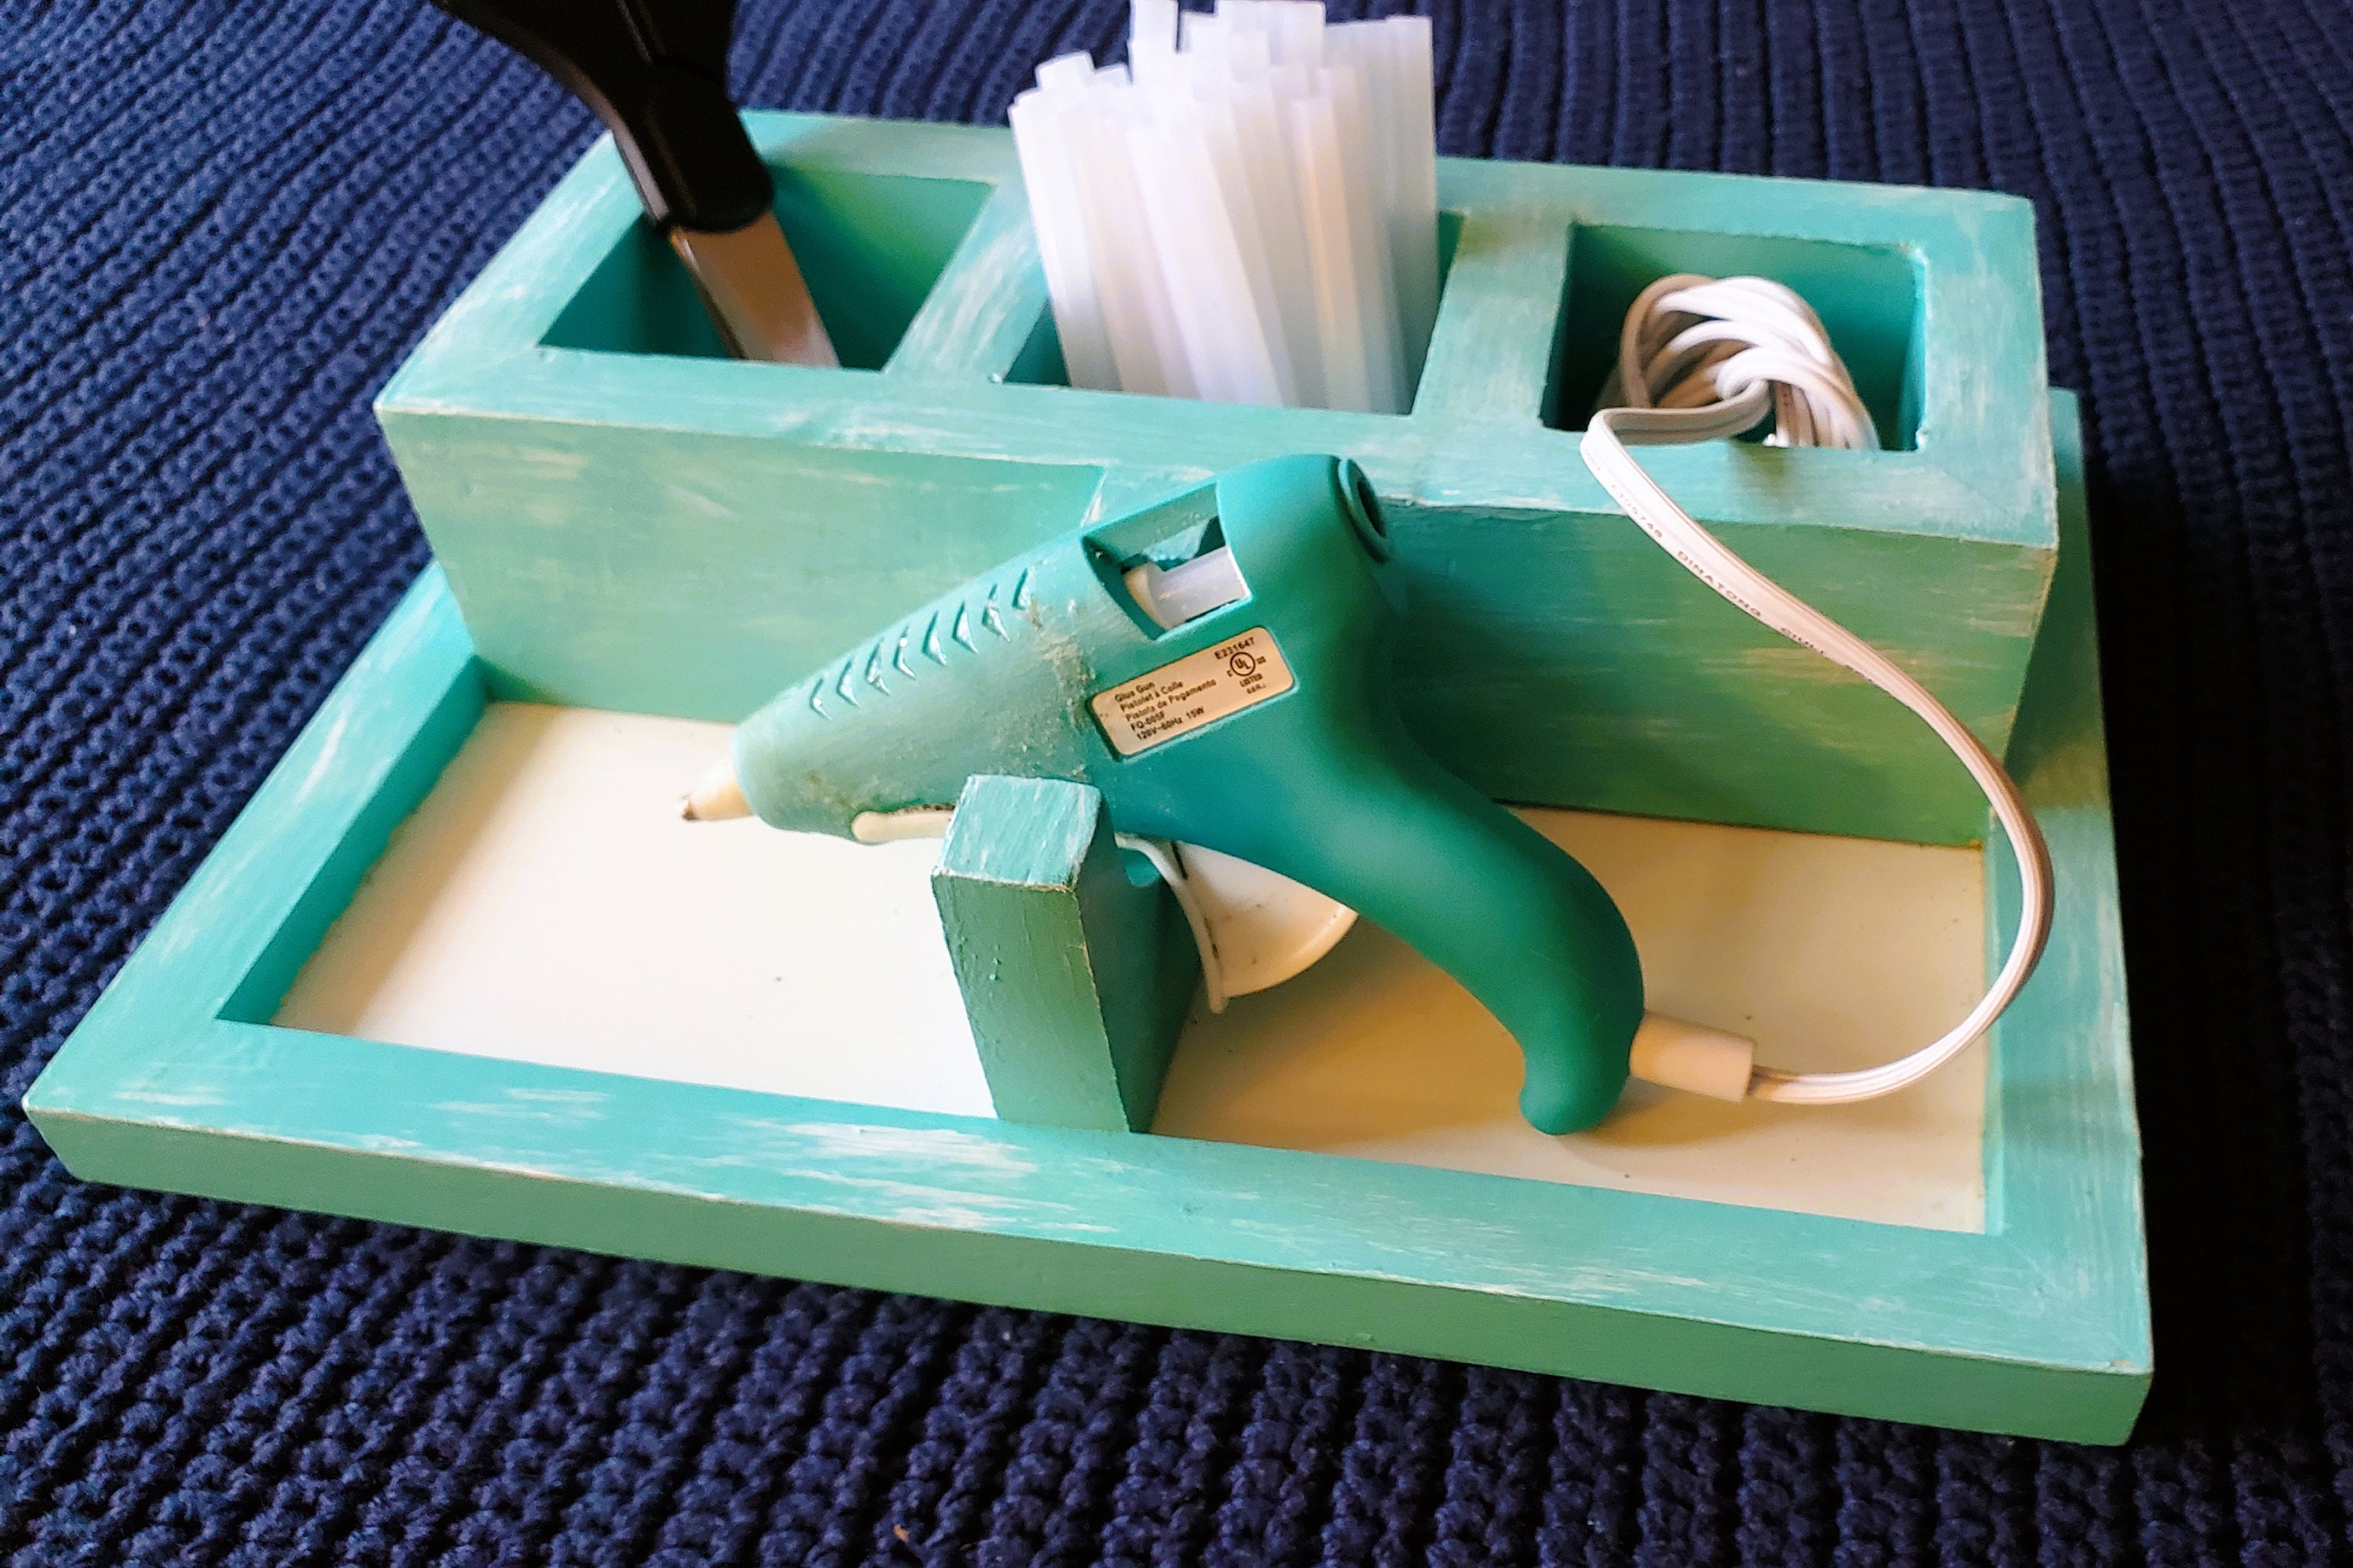 glue gun holder products for sale